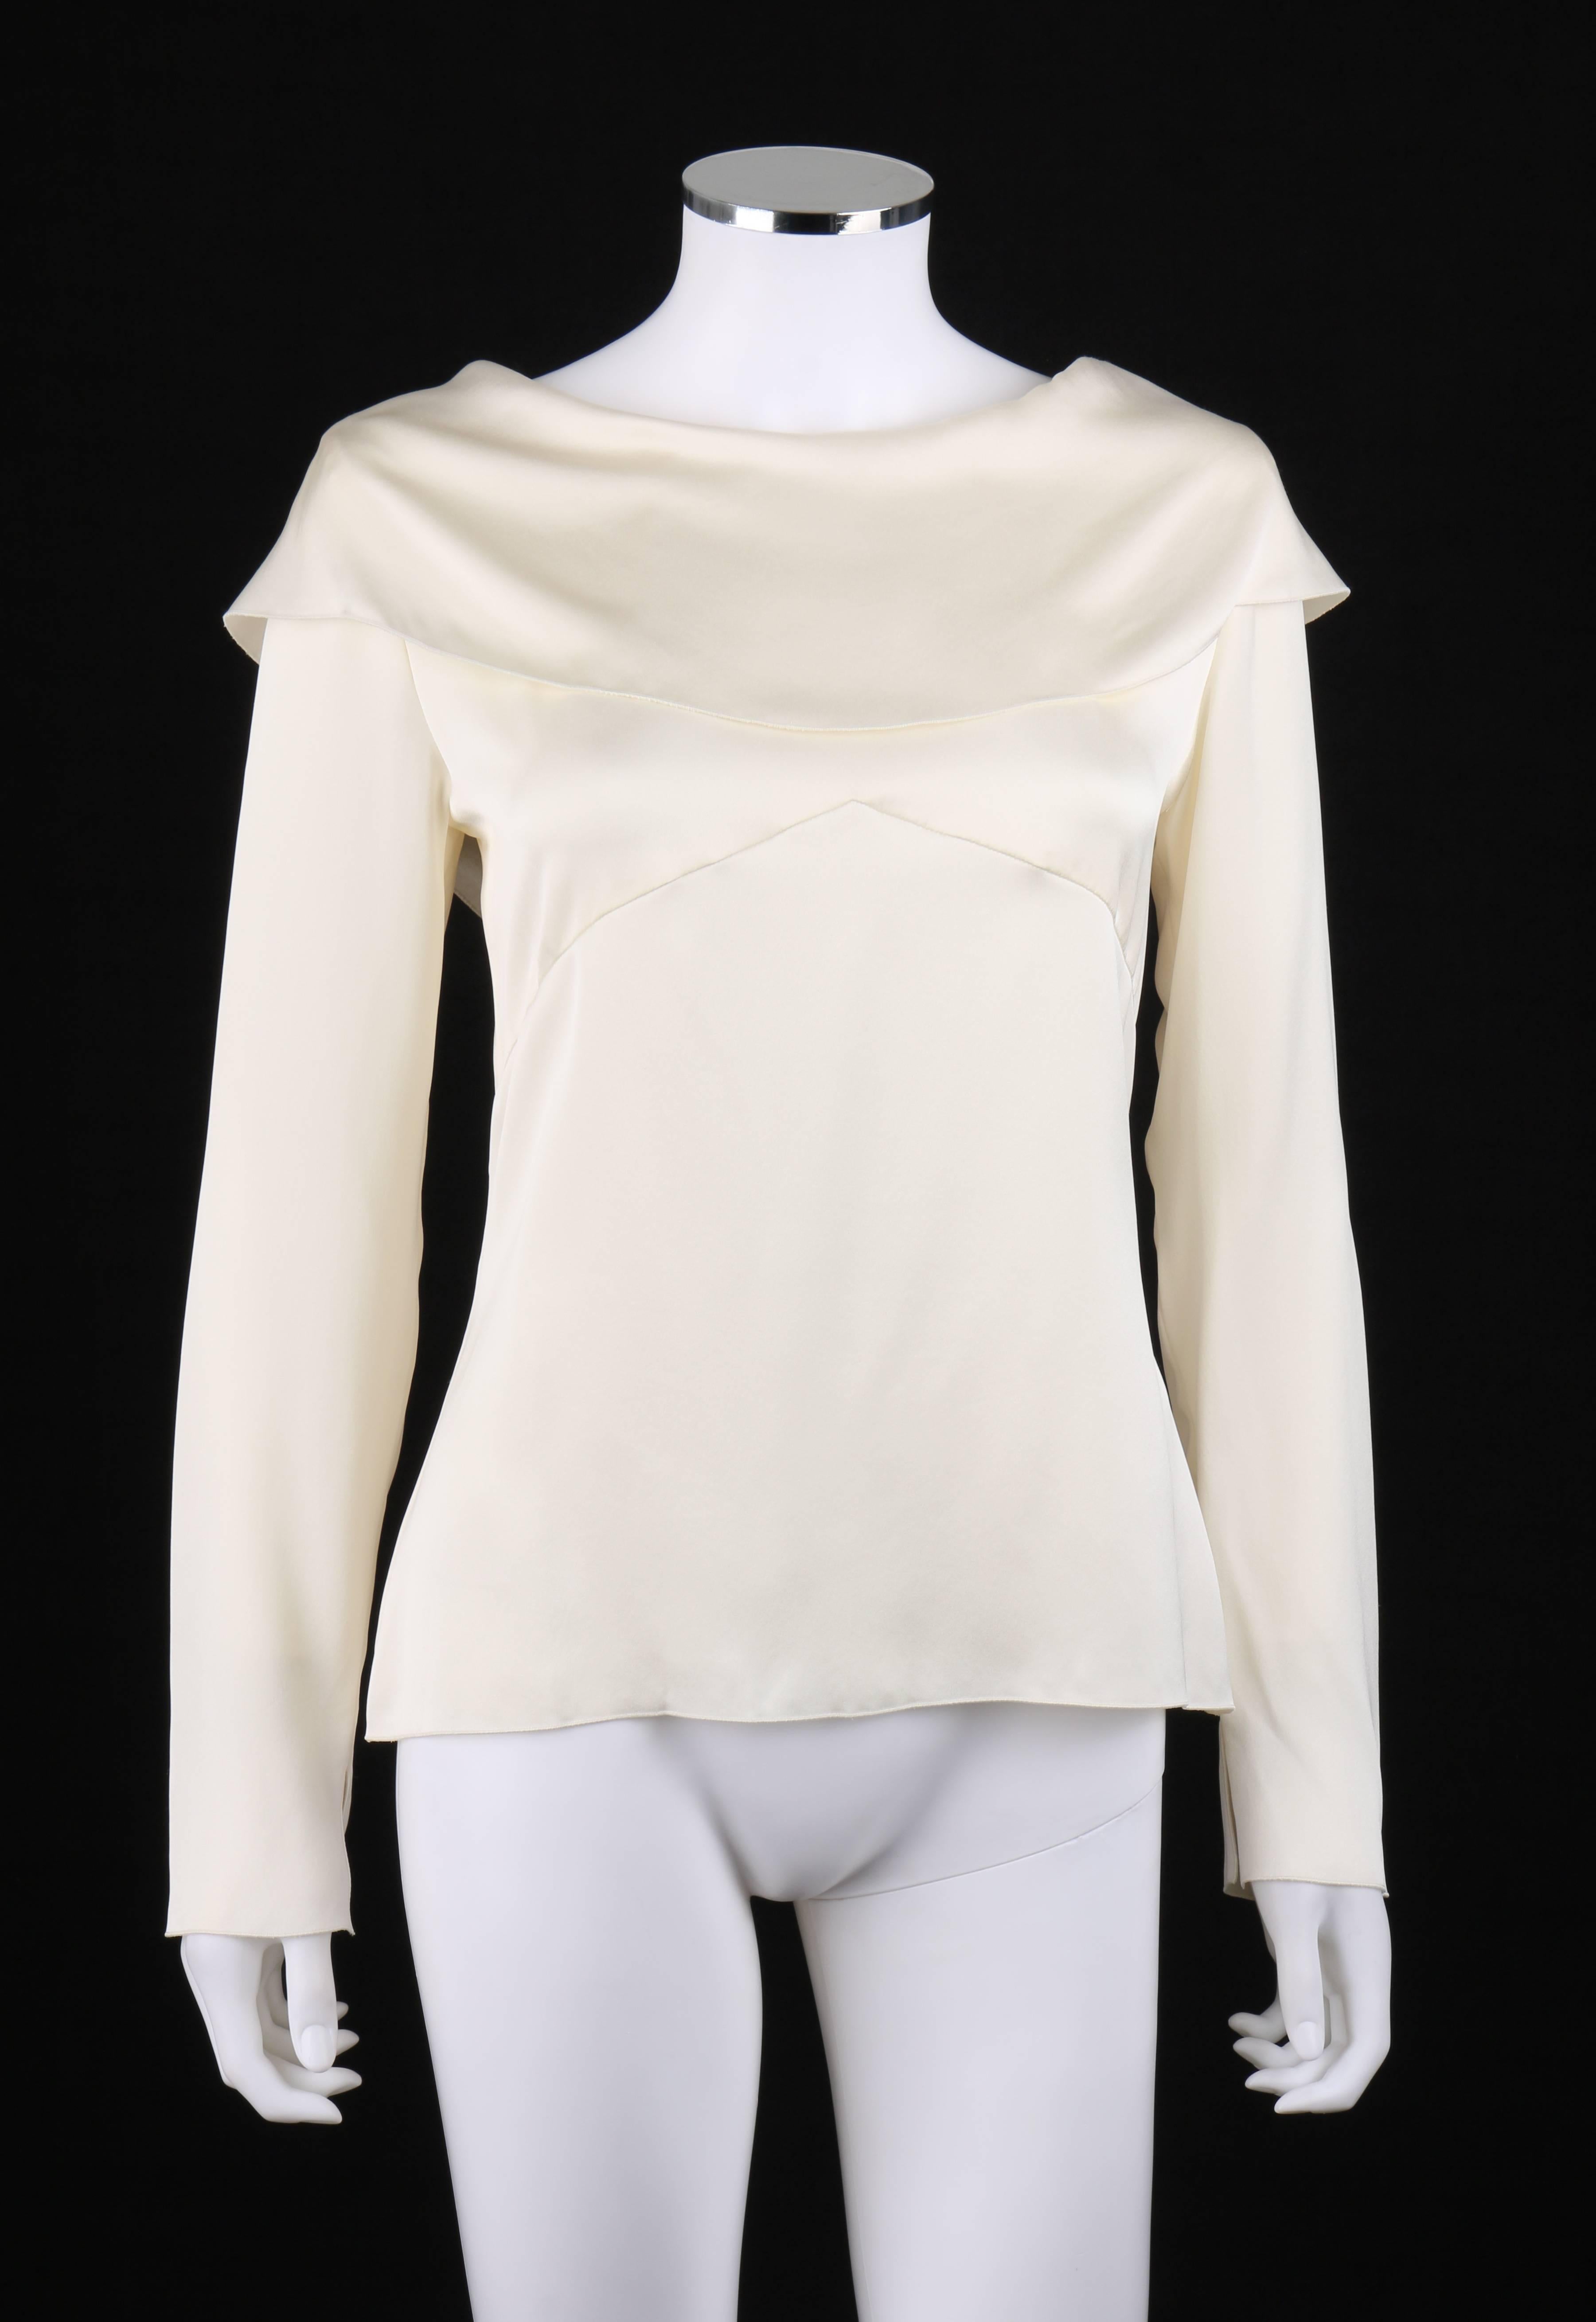 Chanel Autumn / Winter 2001 off white silk bertha collar top; New with tags. Designed by Karl Lagerfeld. Long sleeves with slit at cuff. Bertha collar with center back slit. Pointed under bust seam at front. Six center back button closures. Unlined.